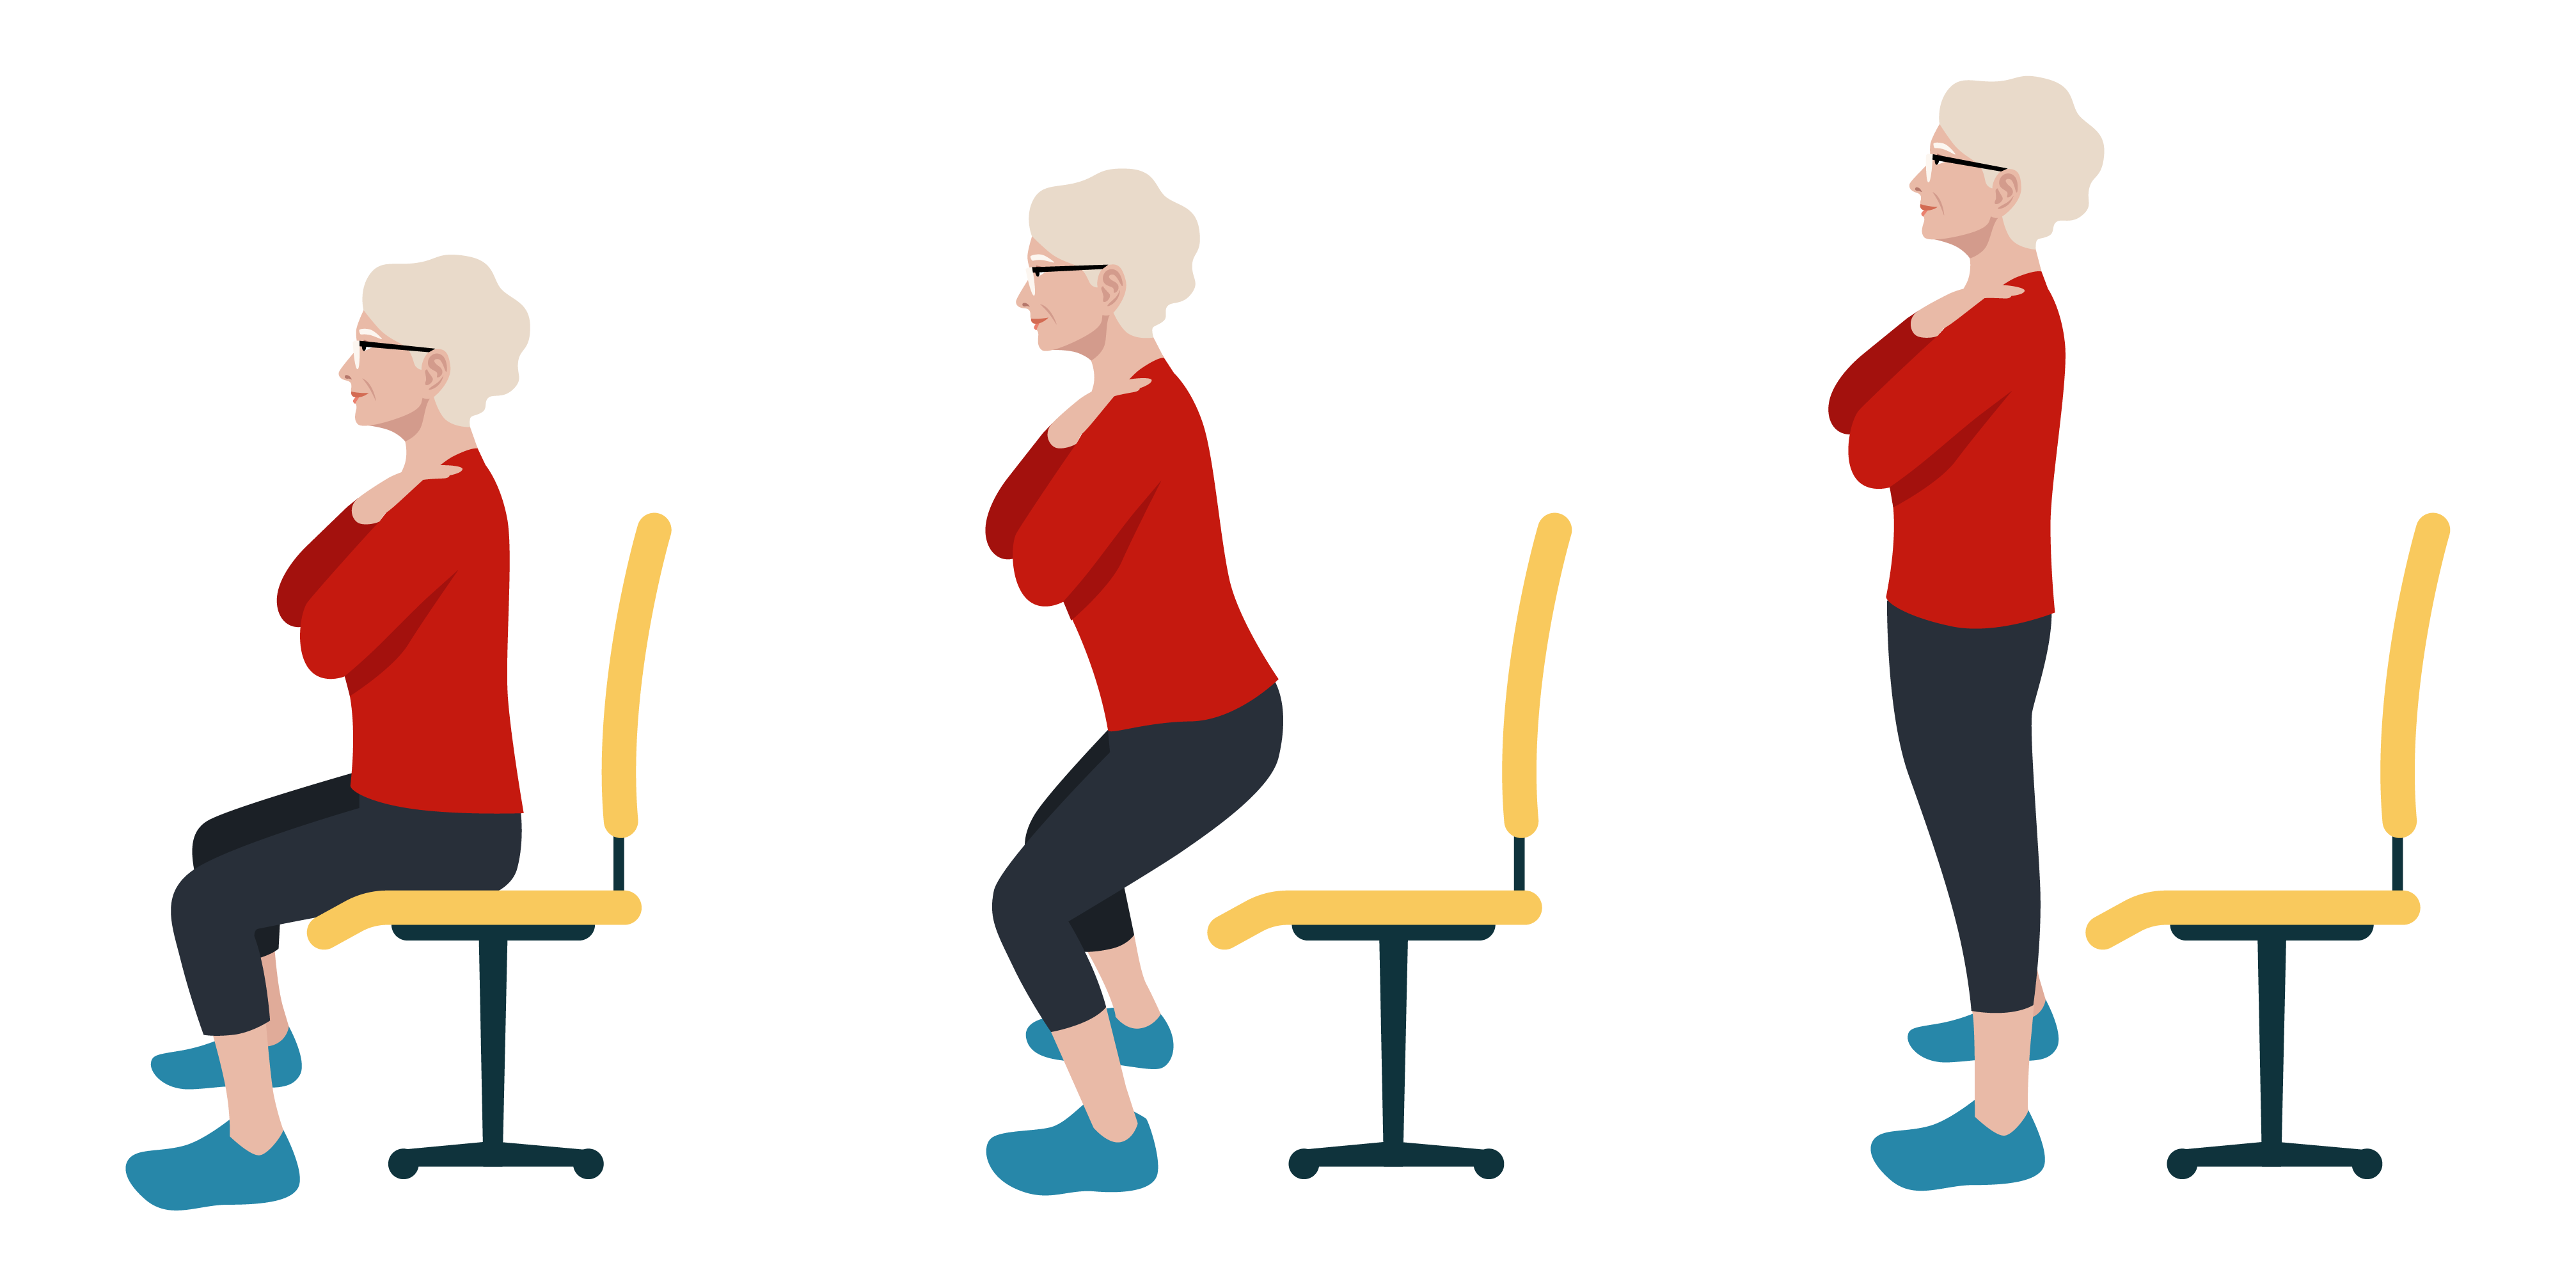 The Sit-to-stand movement is beneficial to improve balance and leg muscle strength.